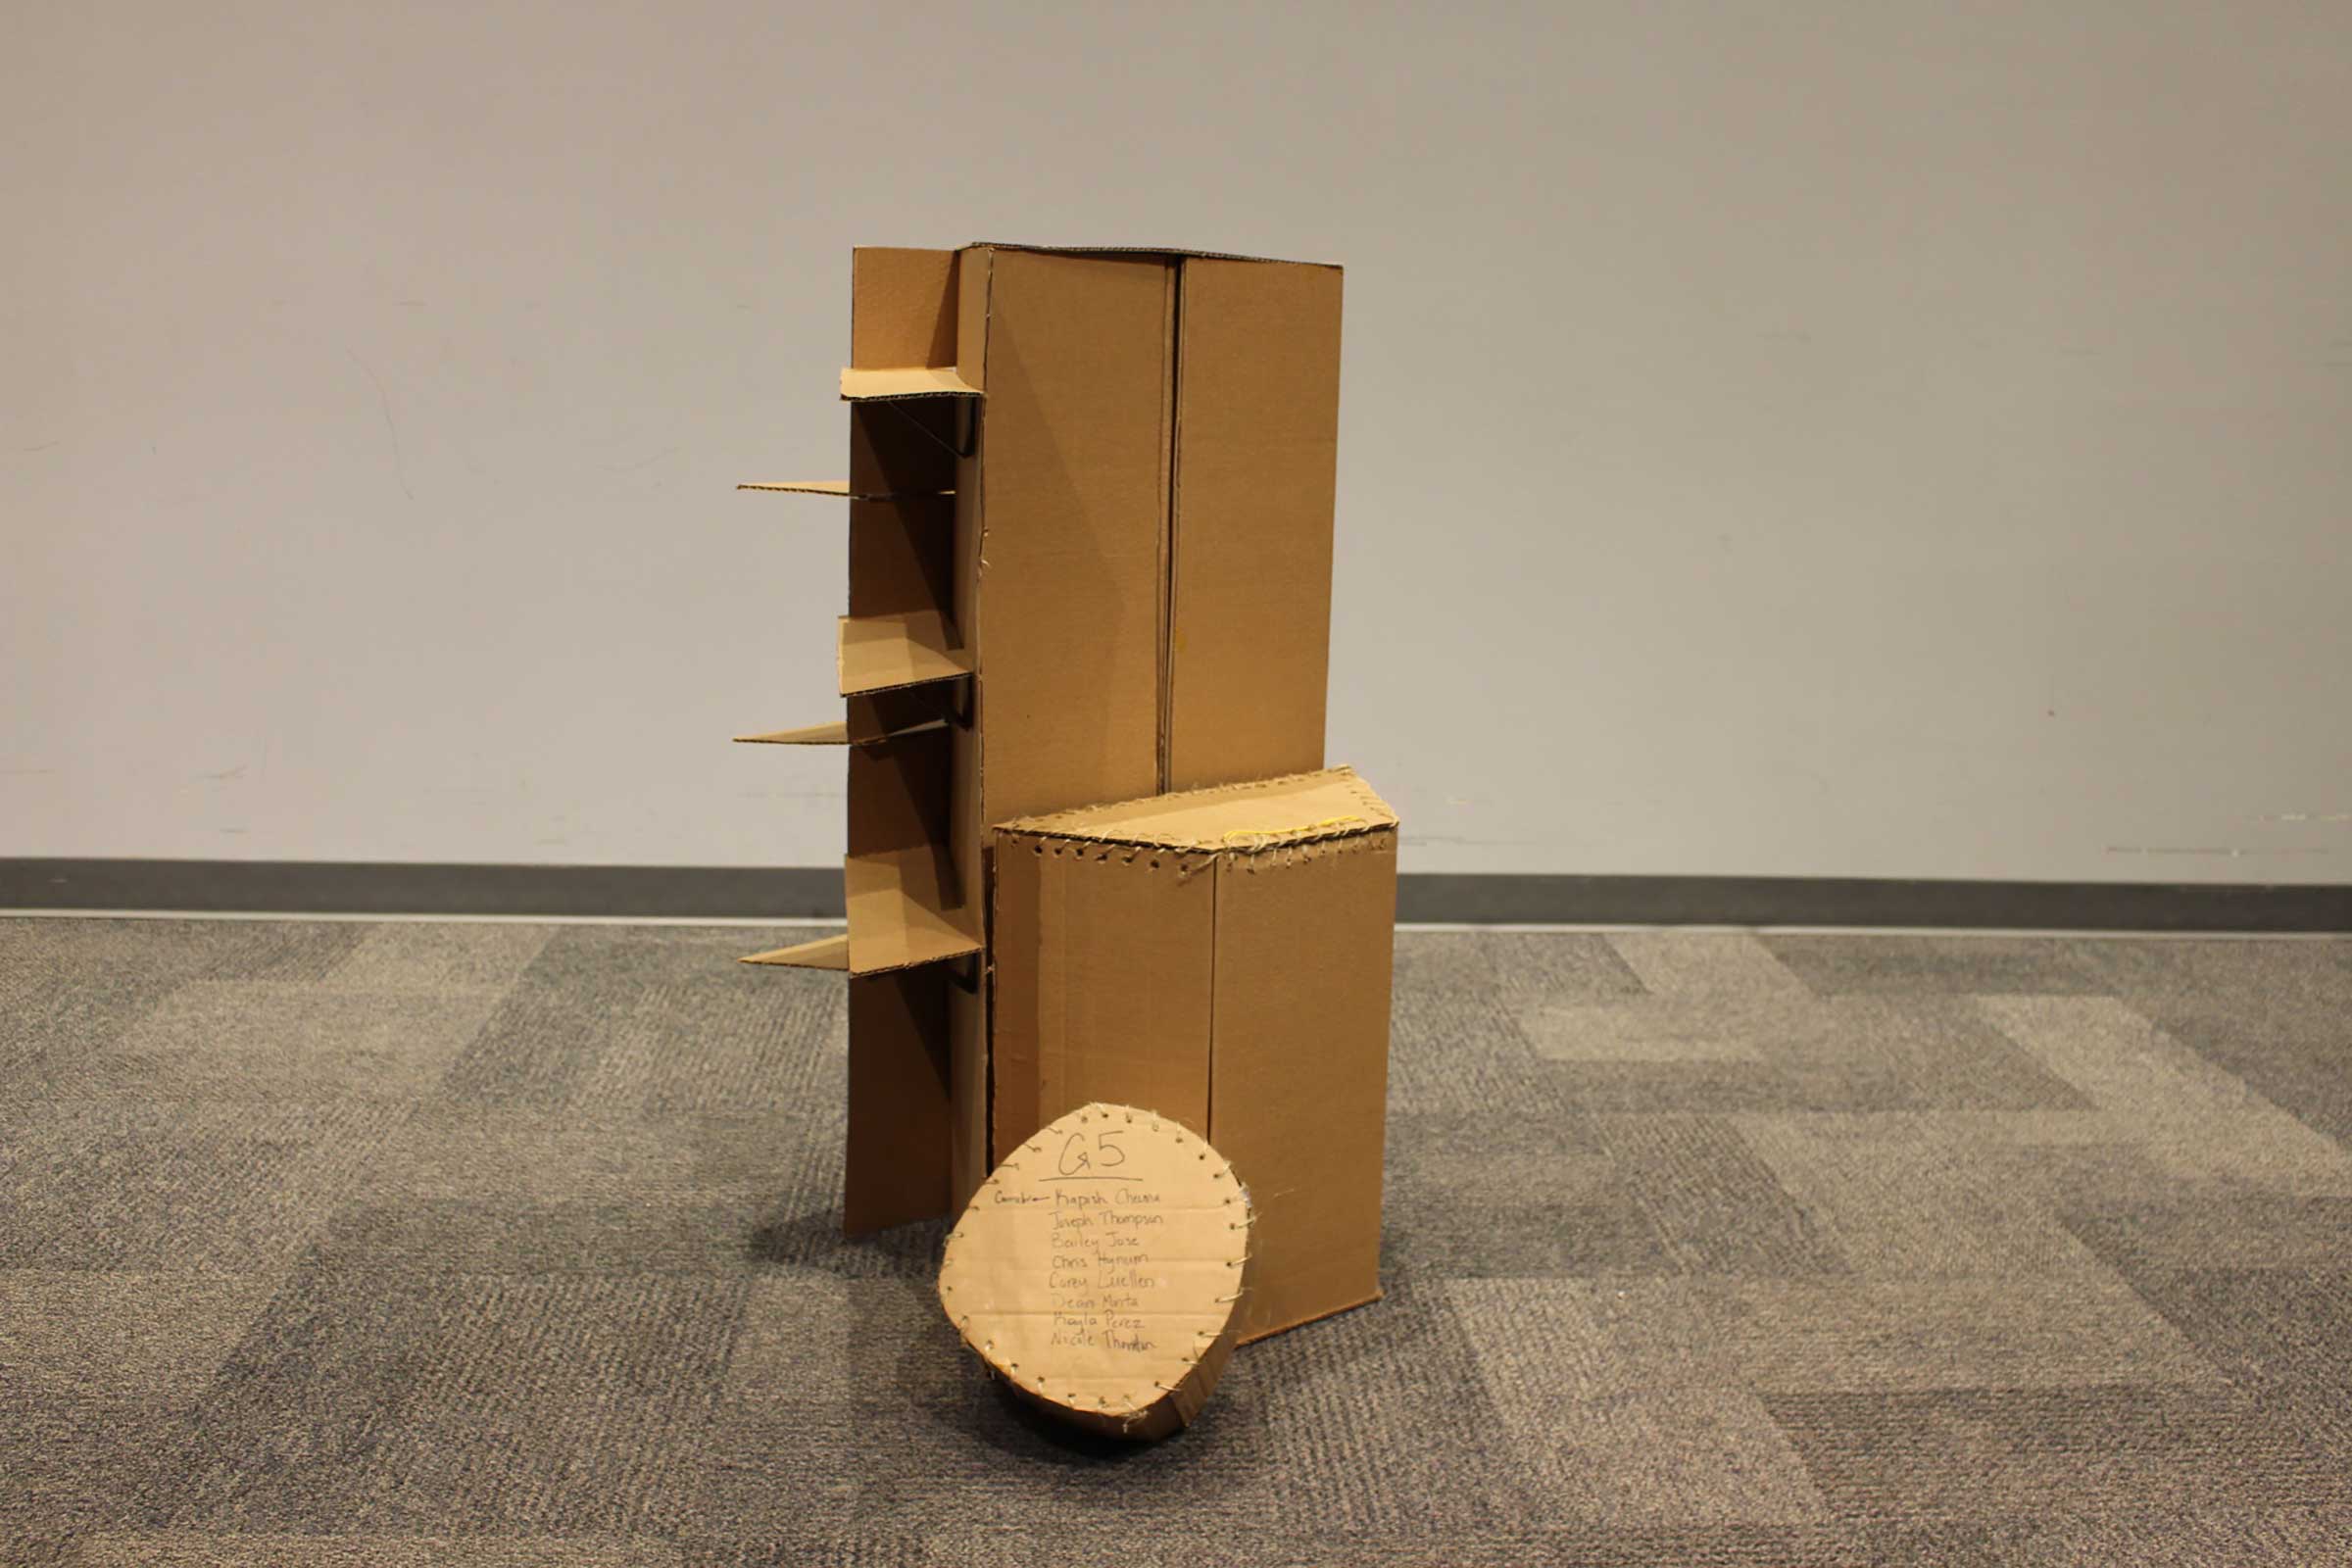 Day 4: Cardboard Sitting Device – Review 2